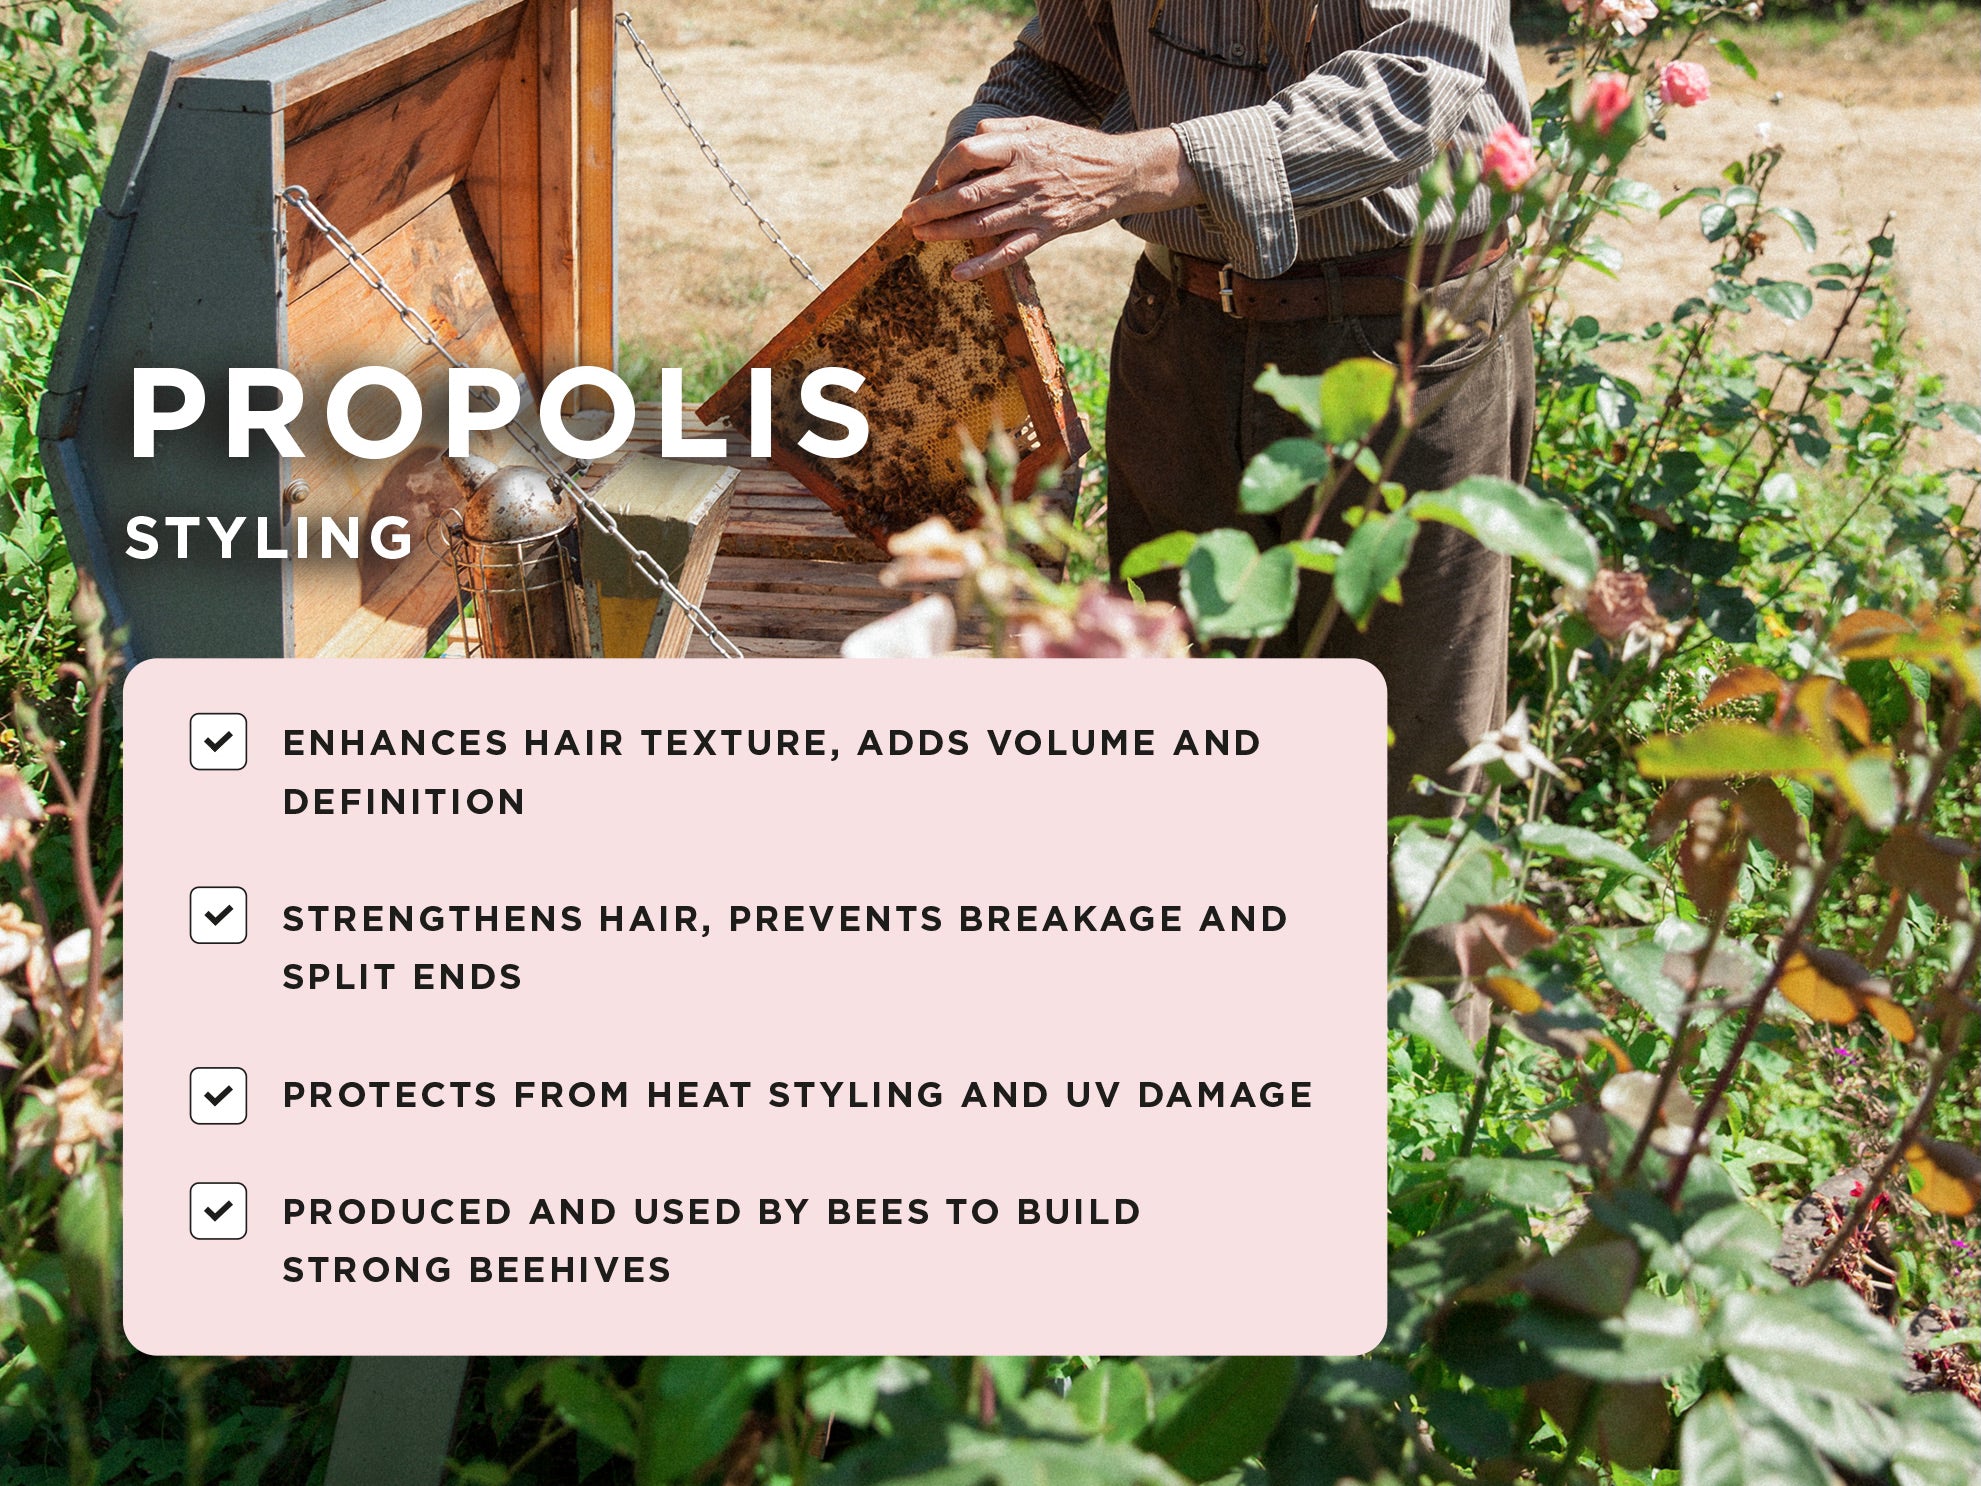 Propolis benefits for hair